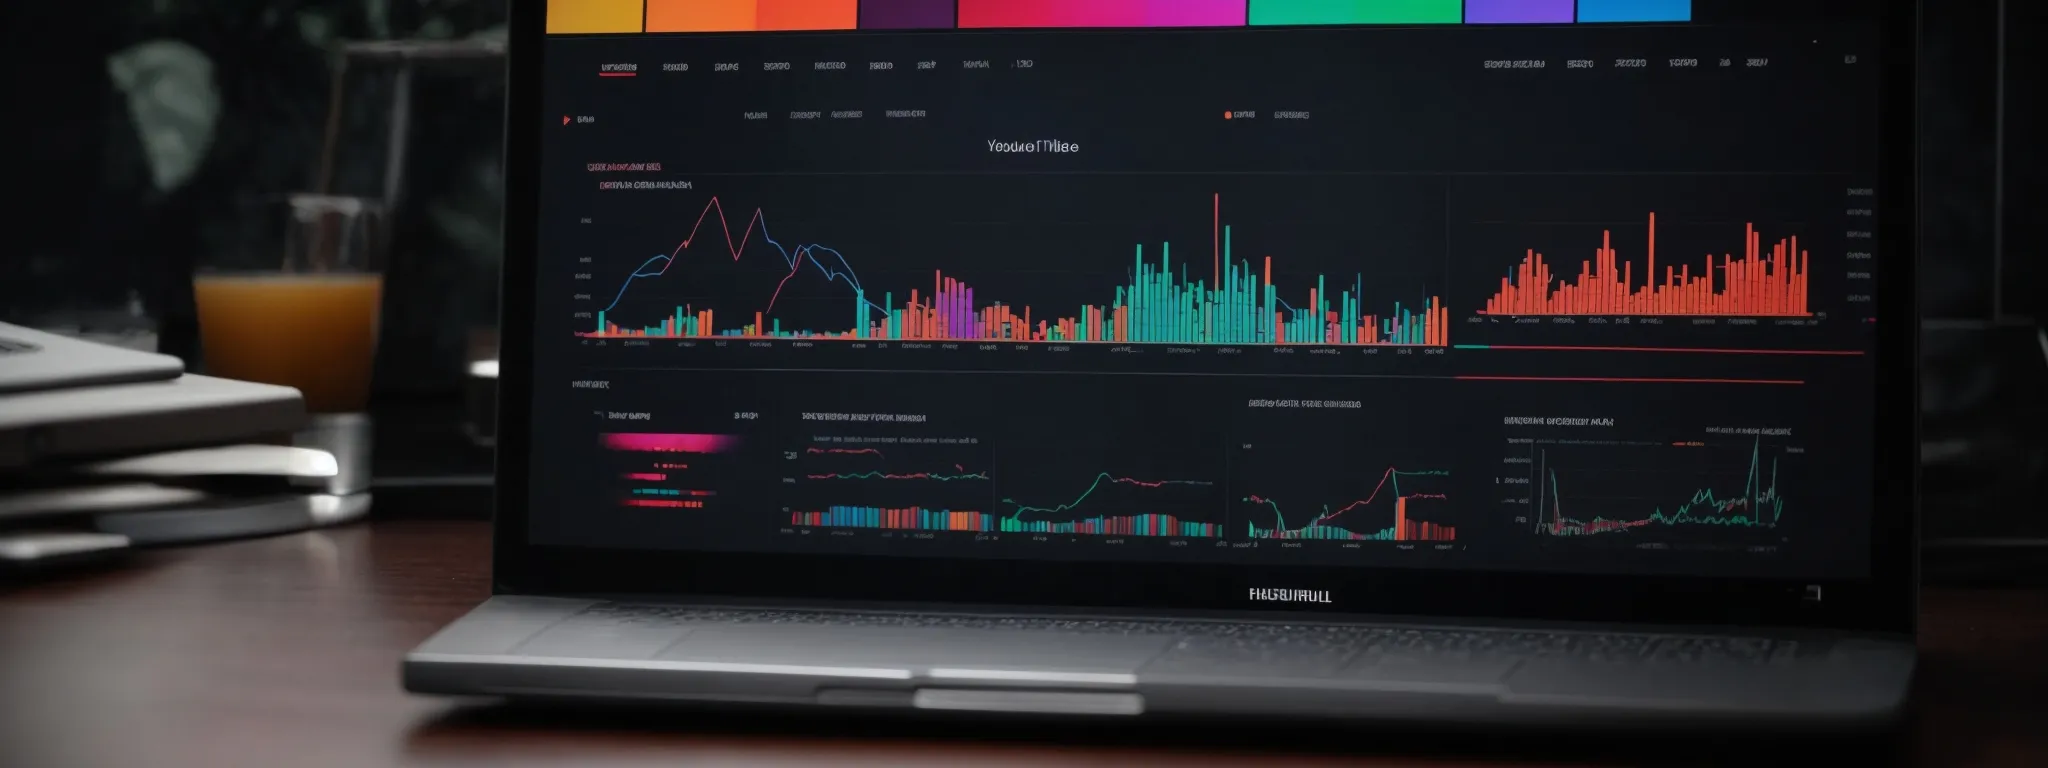 a laptop screen displays colorful graphs and charts representing youtube keyword analytics.